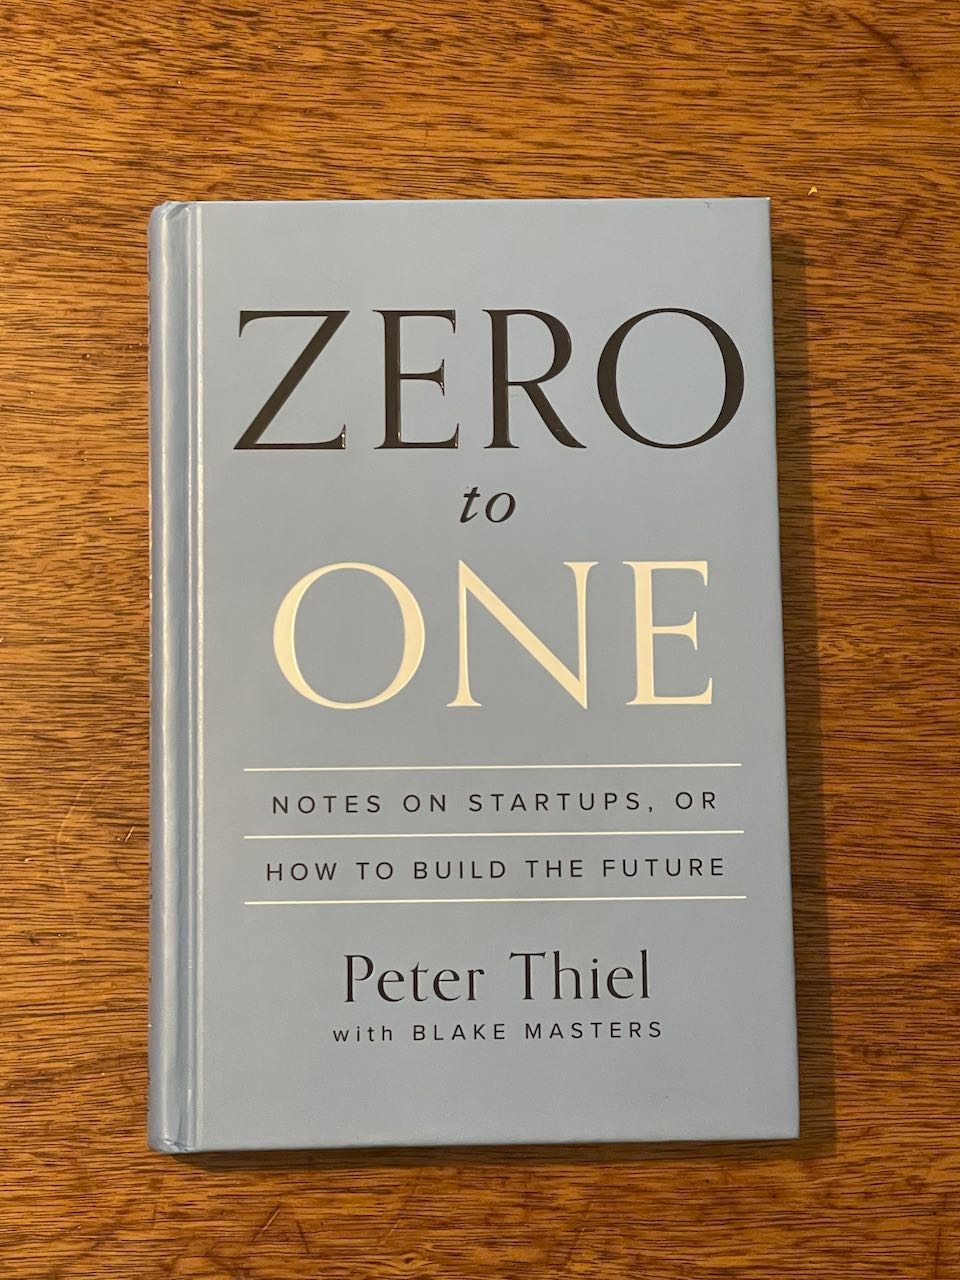 Zero to One Notes on Startups, or How to Build the Future de Thiel, Peter;  Masters, Blake: Fine Hardcover (2014) 1st Edition, Signed by Author(s)